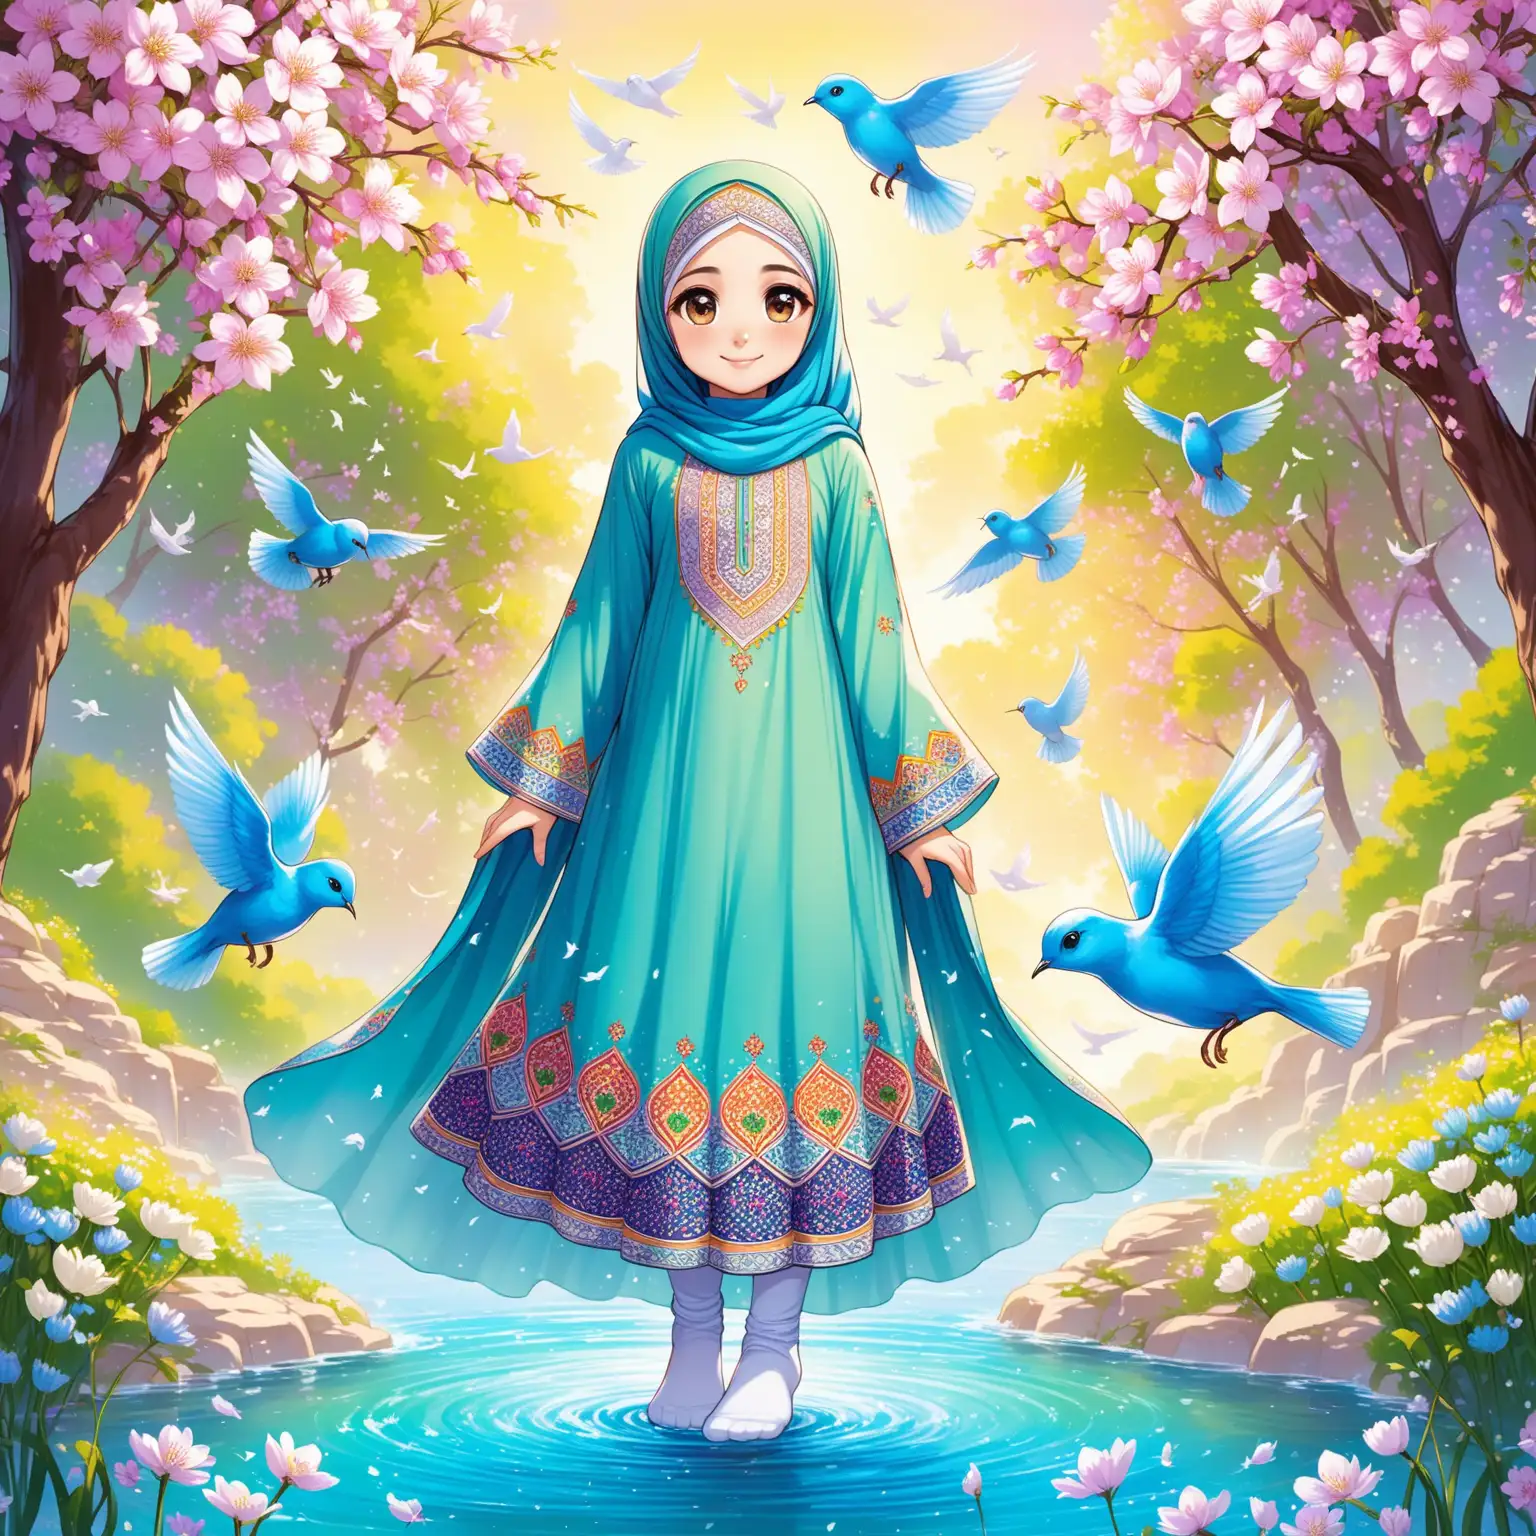 Persian Muslim Girl Delighted by Springtimes Natural Beauty